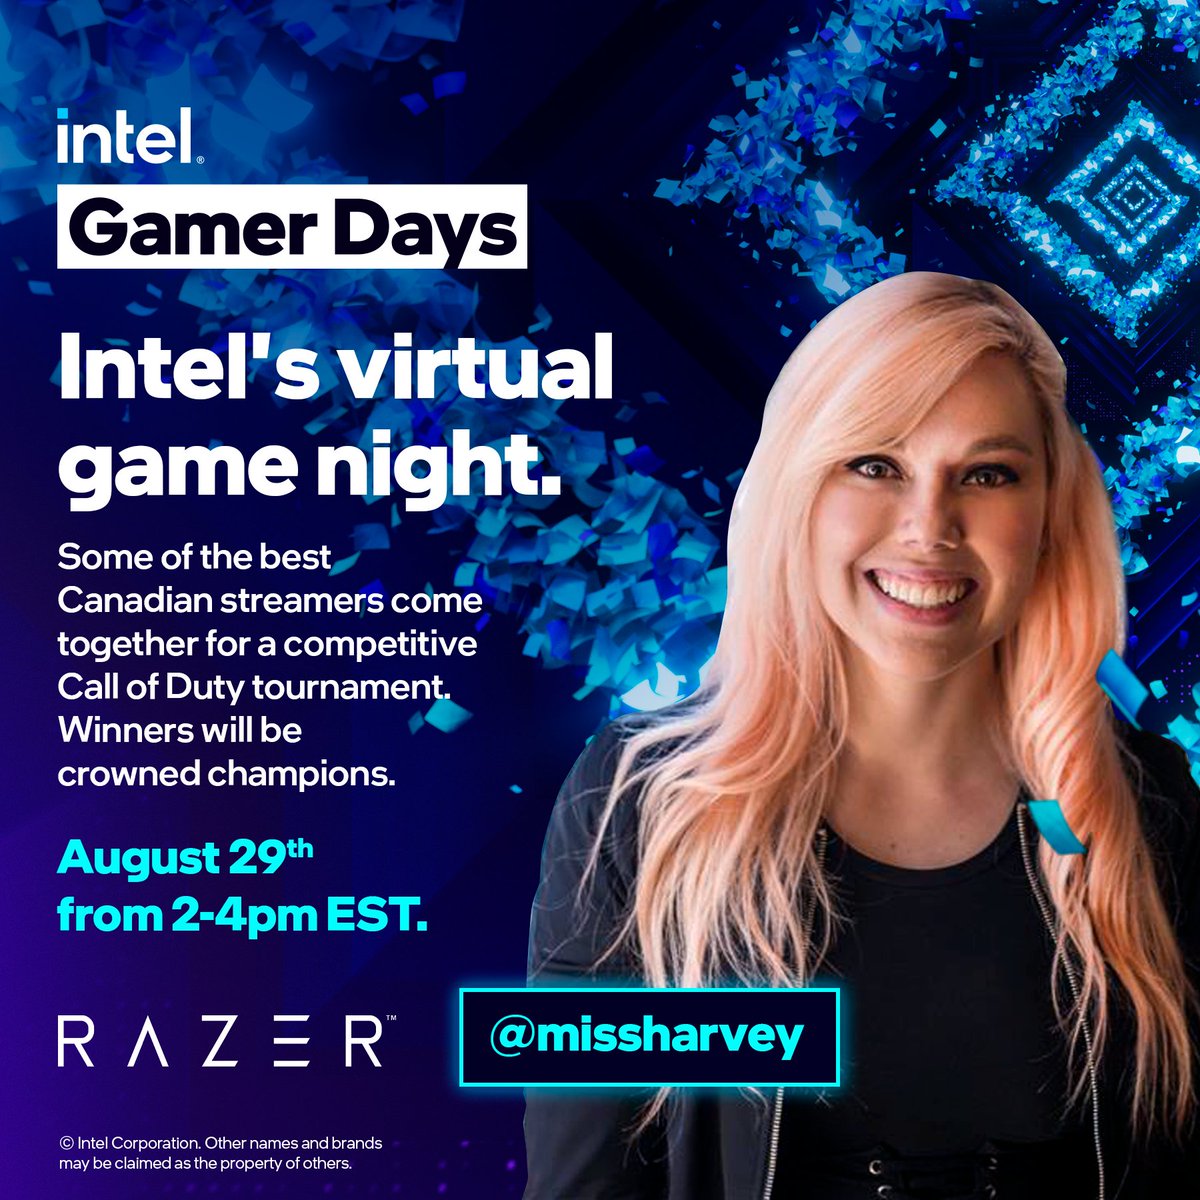 It's officially the beginning of #IntelGamerDays!✨On 8/29 @2-4pm ET, I'll be in a tournament and giving away a Razer Blade 15 laptop & more! Make sure to tune in! You can find this laptop, deals and discounts at gamerdays.intel.ca. @intelcanada @Razer_Canada #IntelPartner